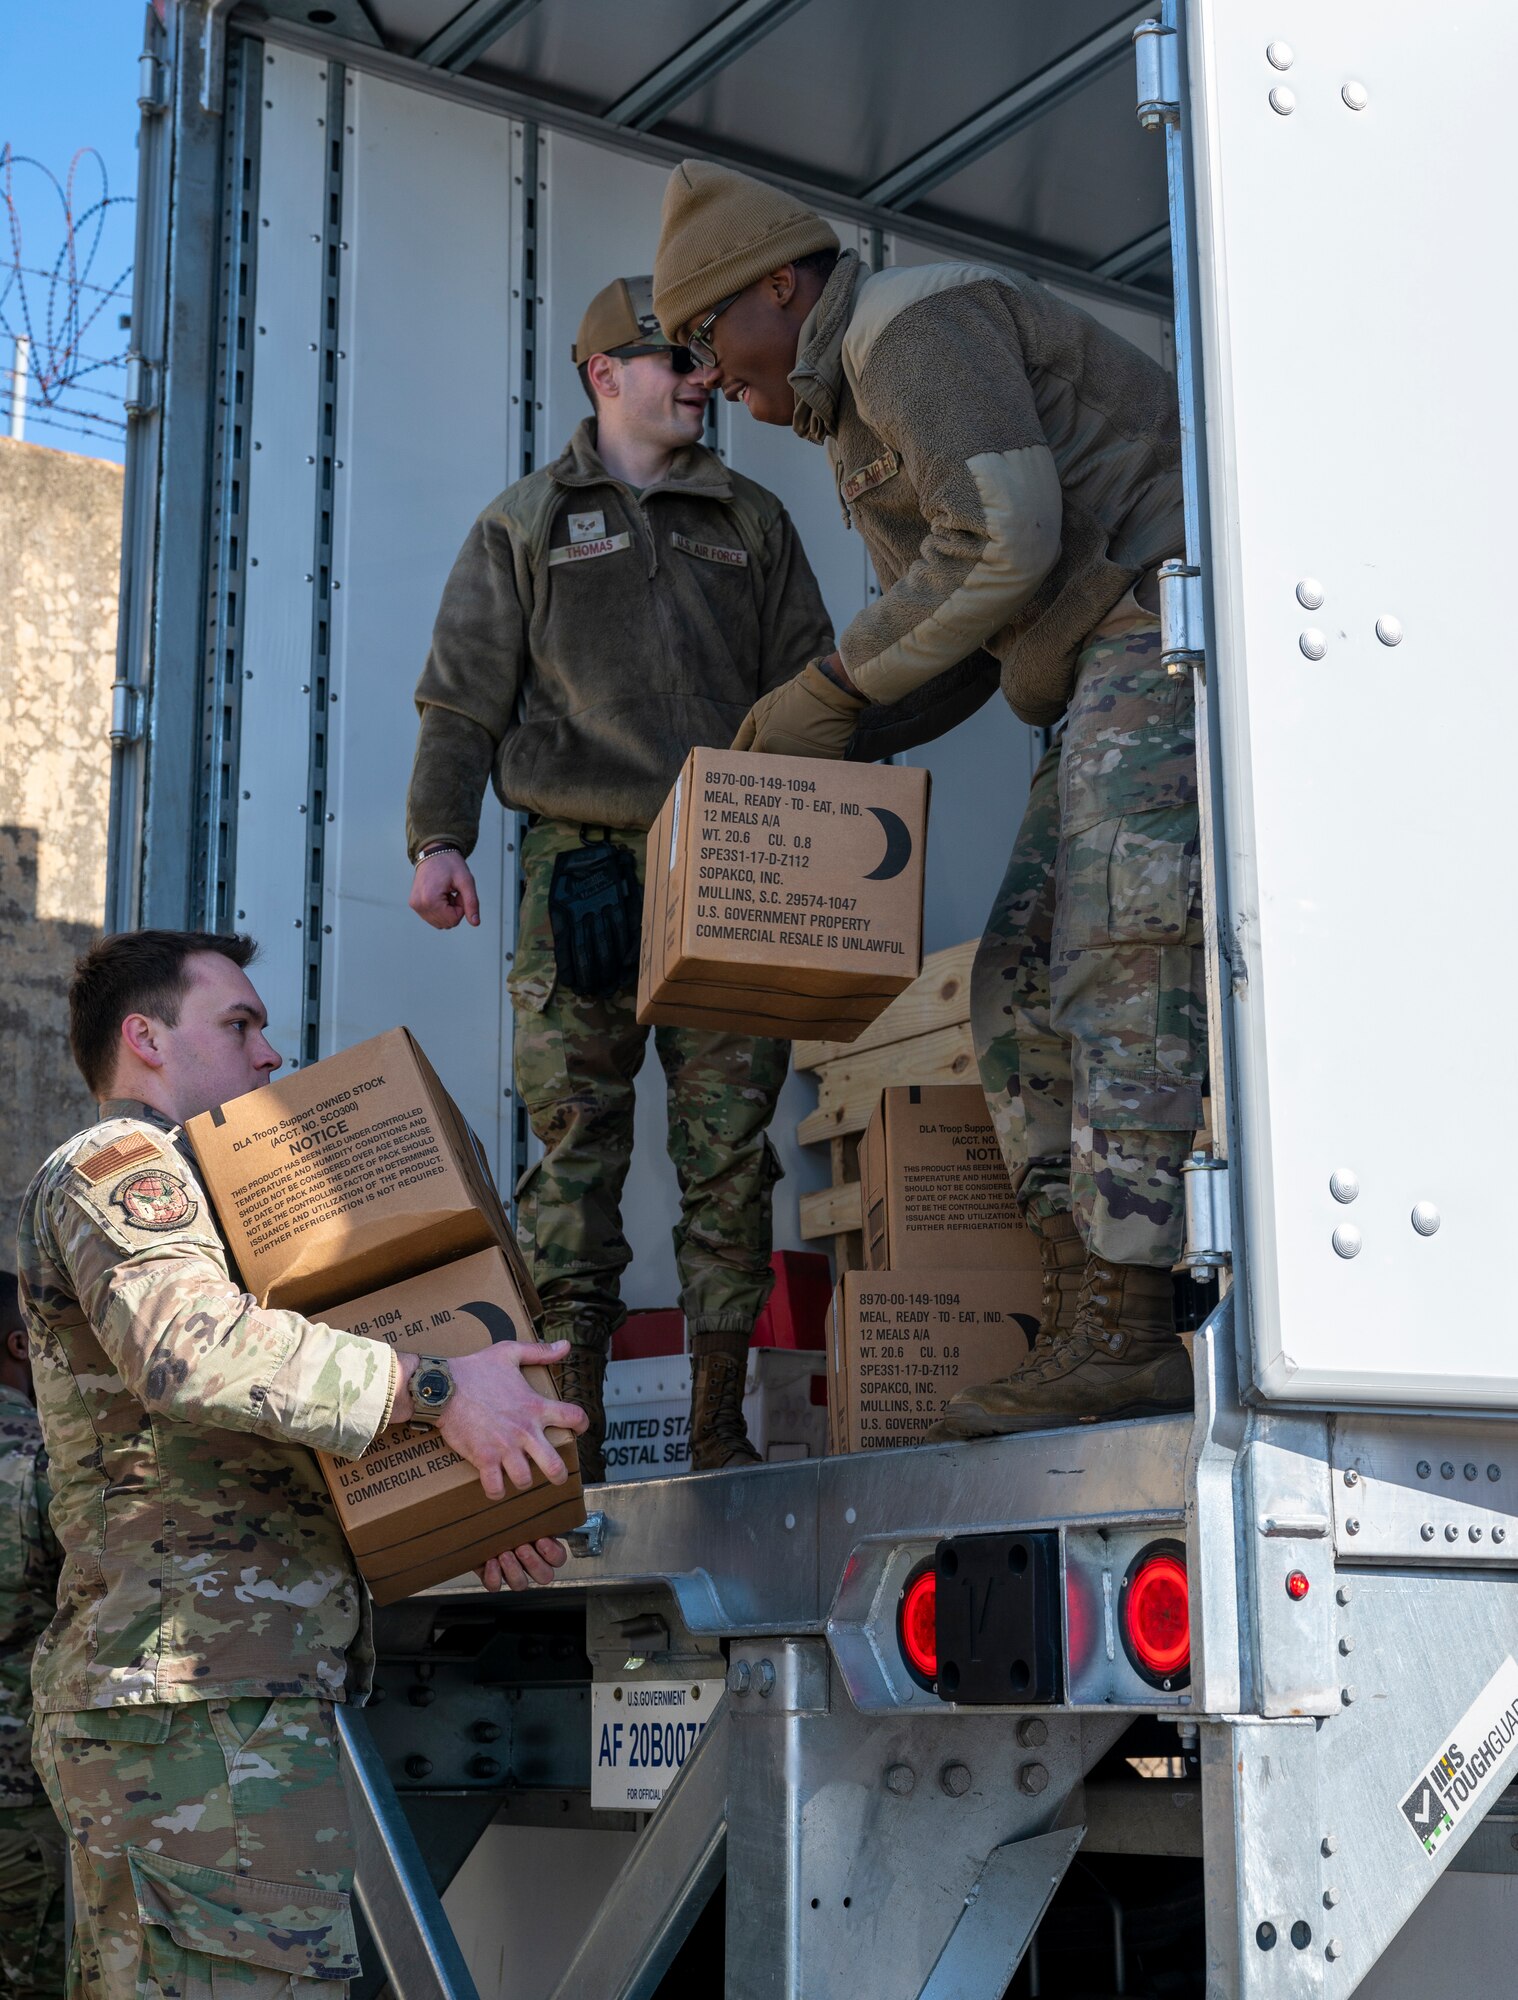 U.S. Air Force Airmen, 51st Fighter Wing, unload meal ready-to-eat boxes during a training event at Daegu Air Base, Republic of Korea, Jan. 30, 2023.